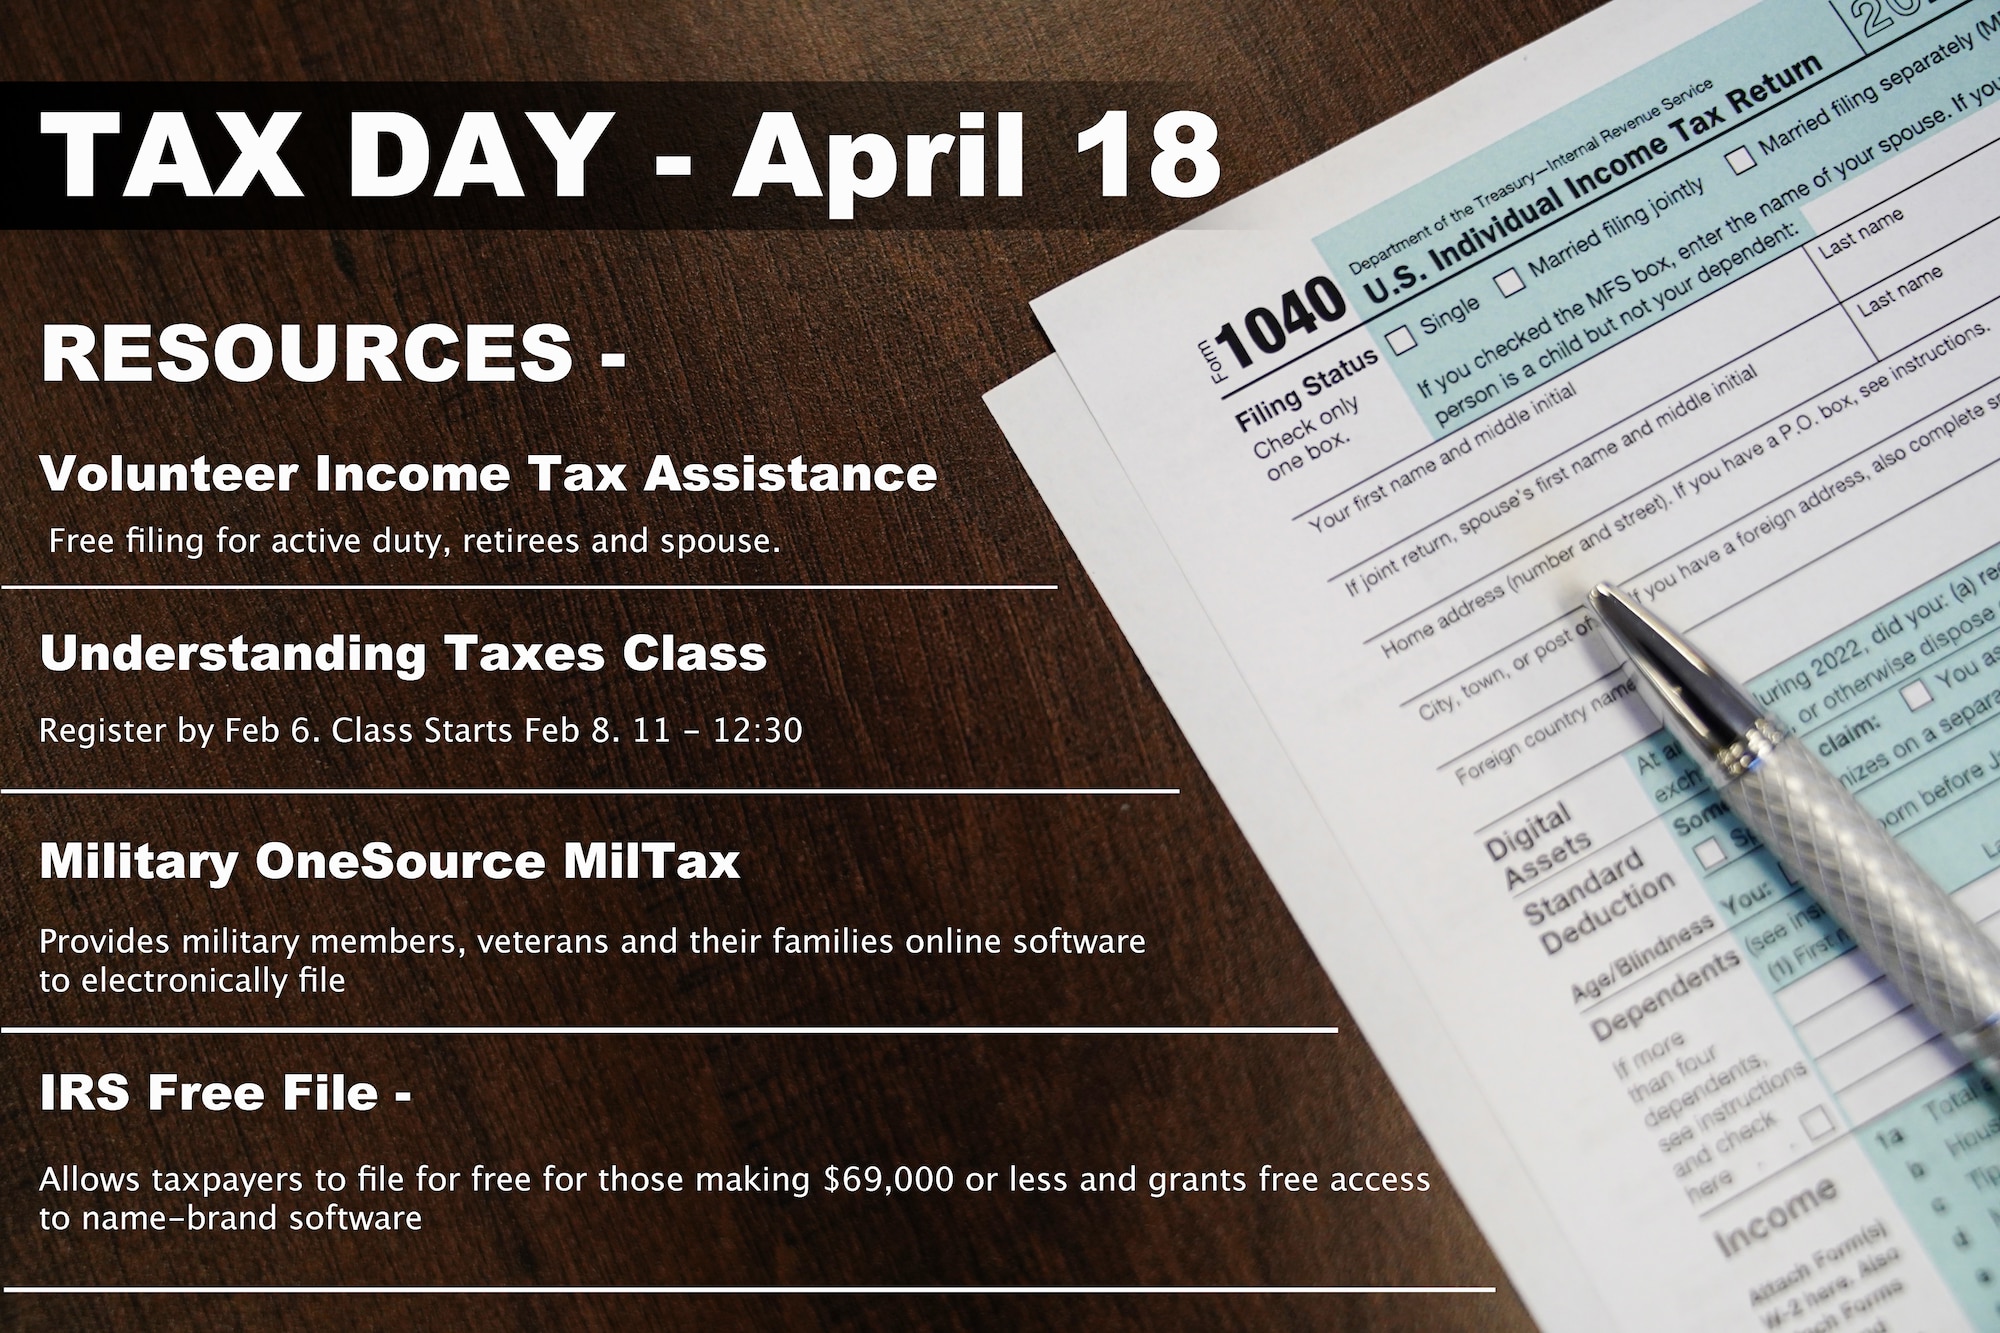 This infographic provides information about tax resources at Keesler Air Force Base, Mississippi, Jan. 19, 2023.